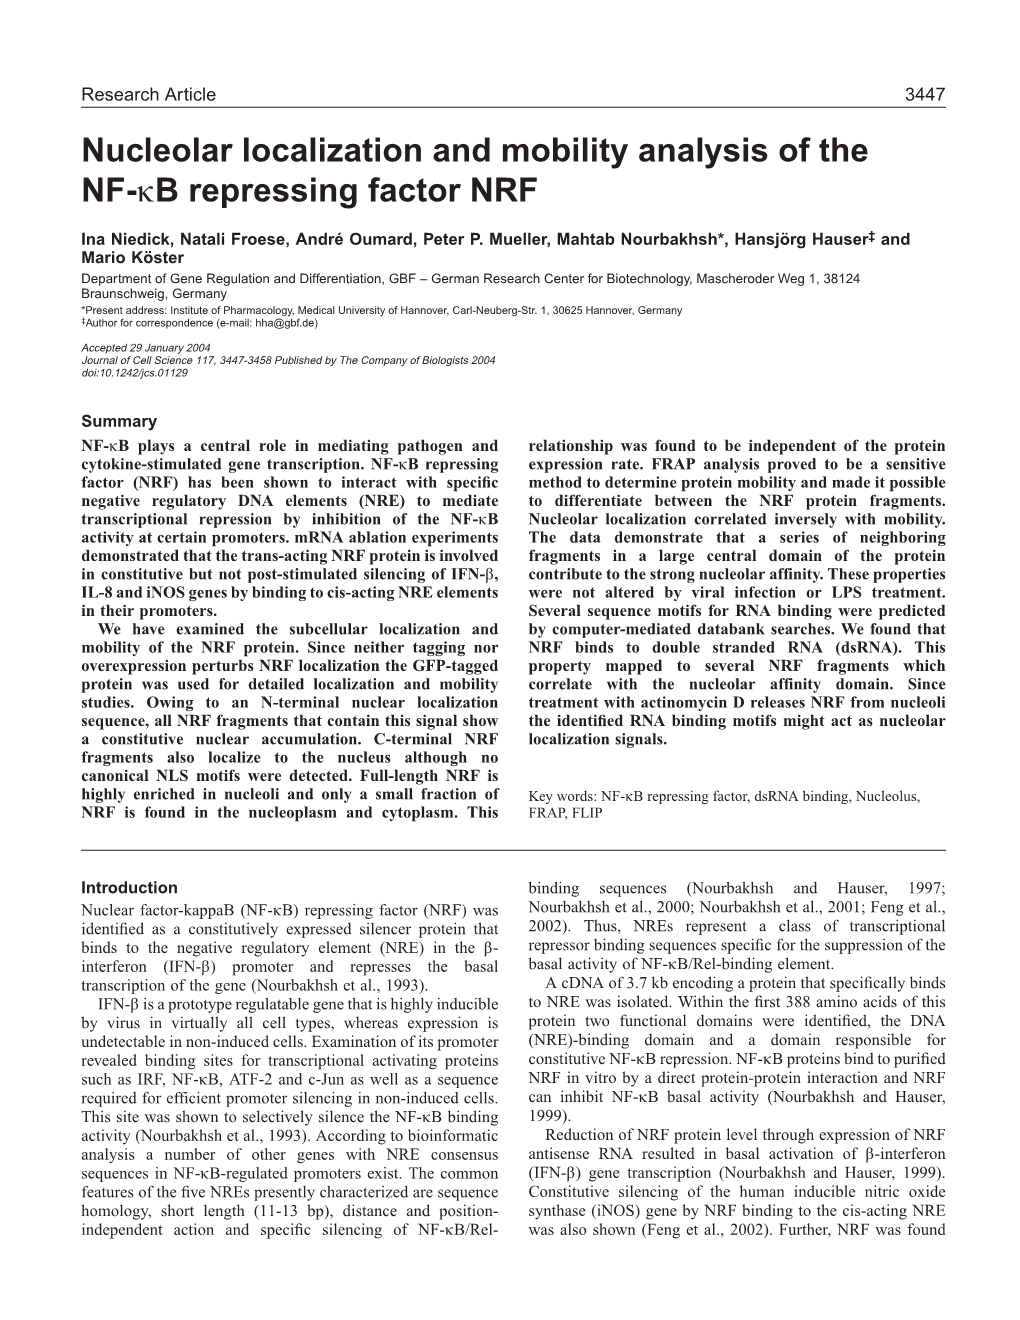 Nucleolar Localization and Mobility Analysis of the NF-Κb Repressing Factor NRF